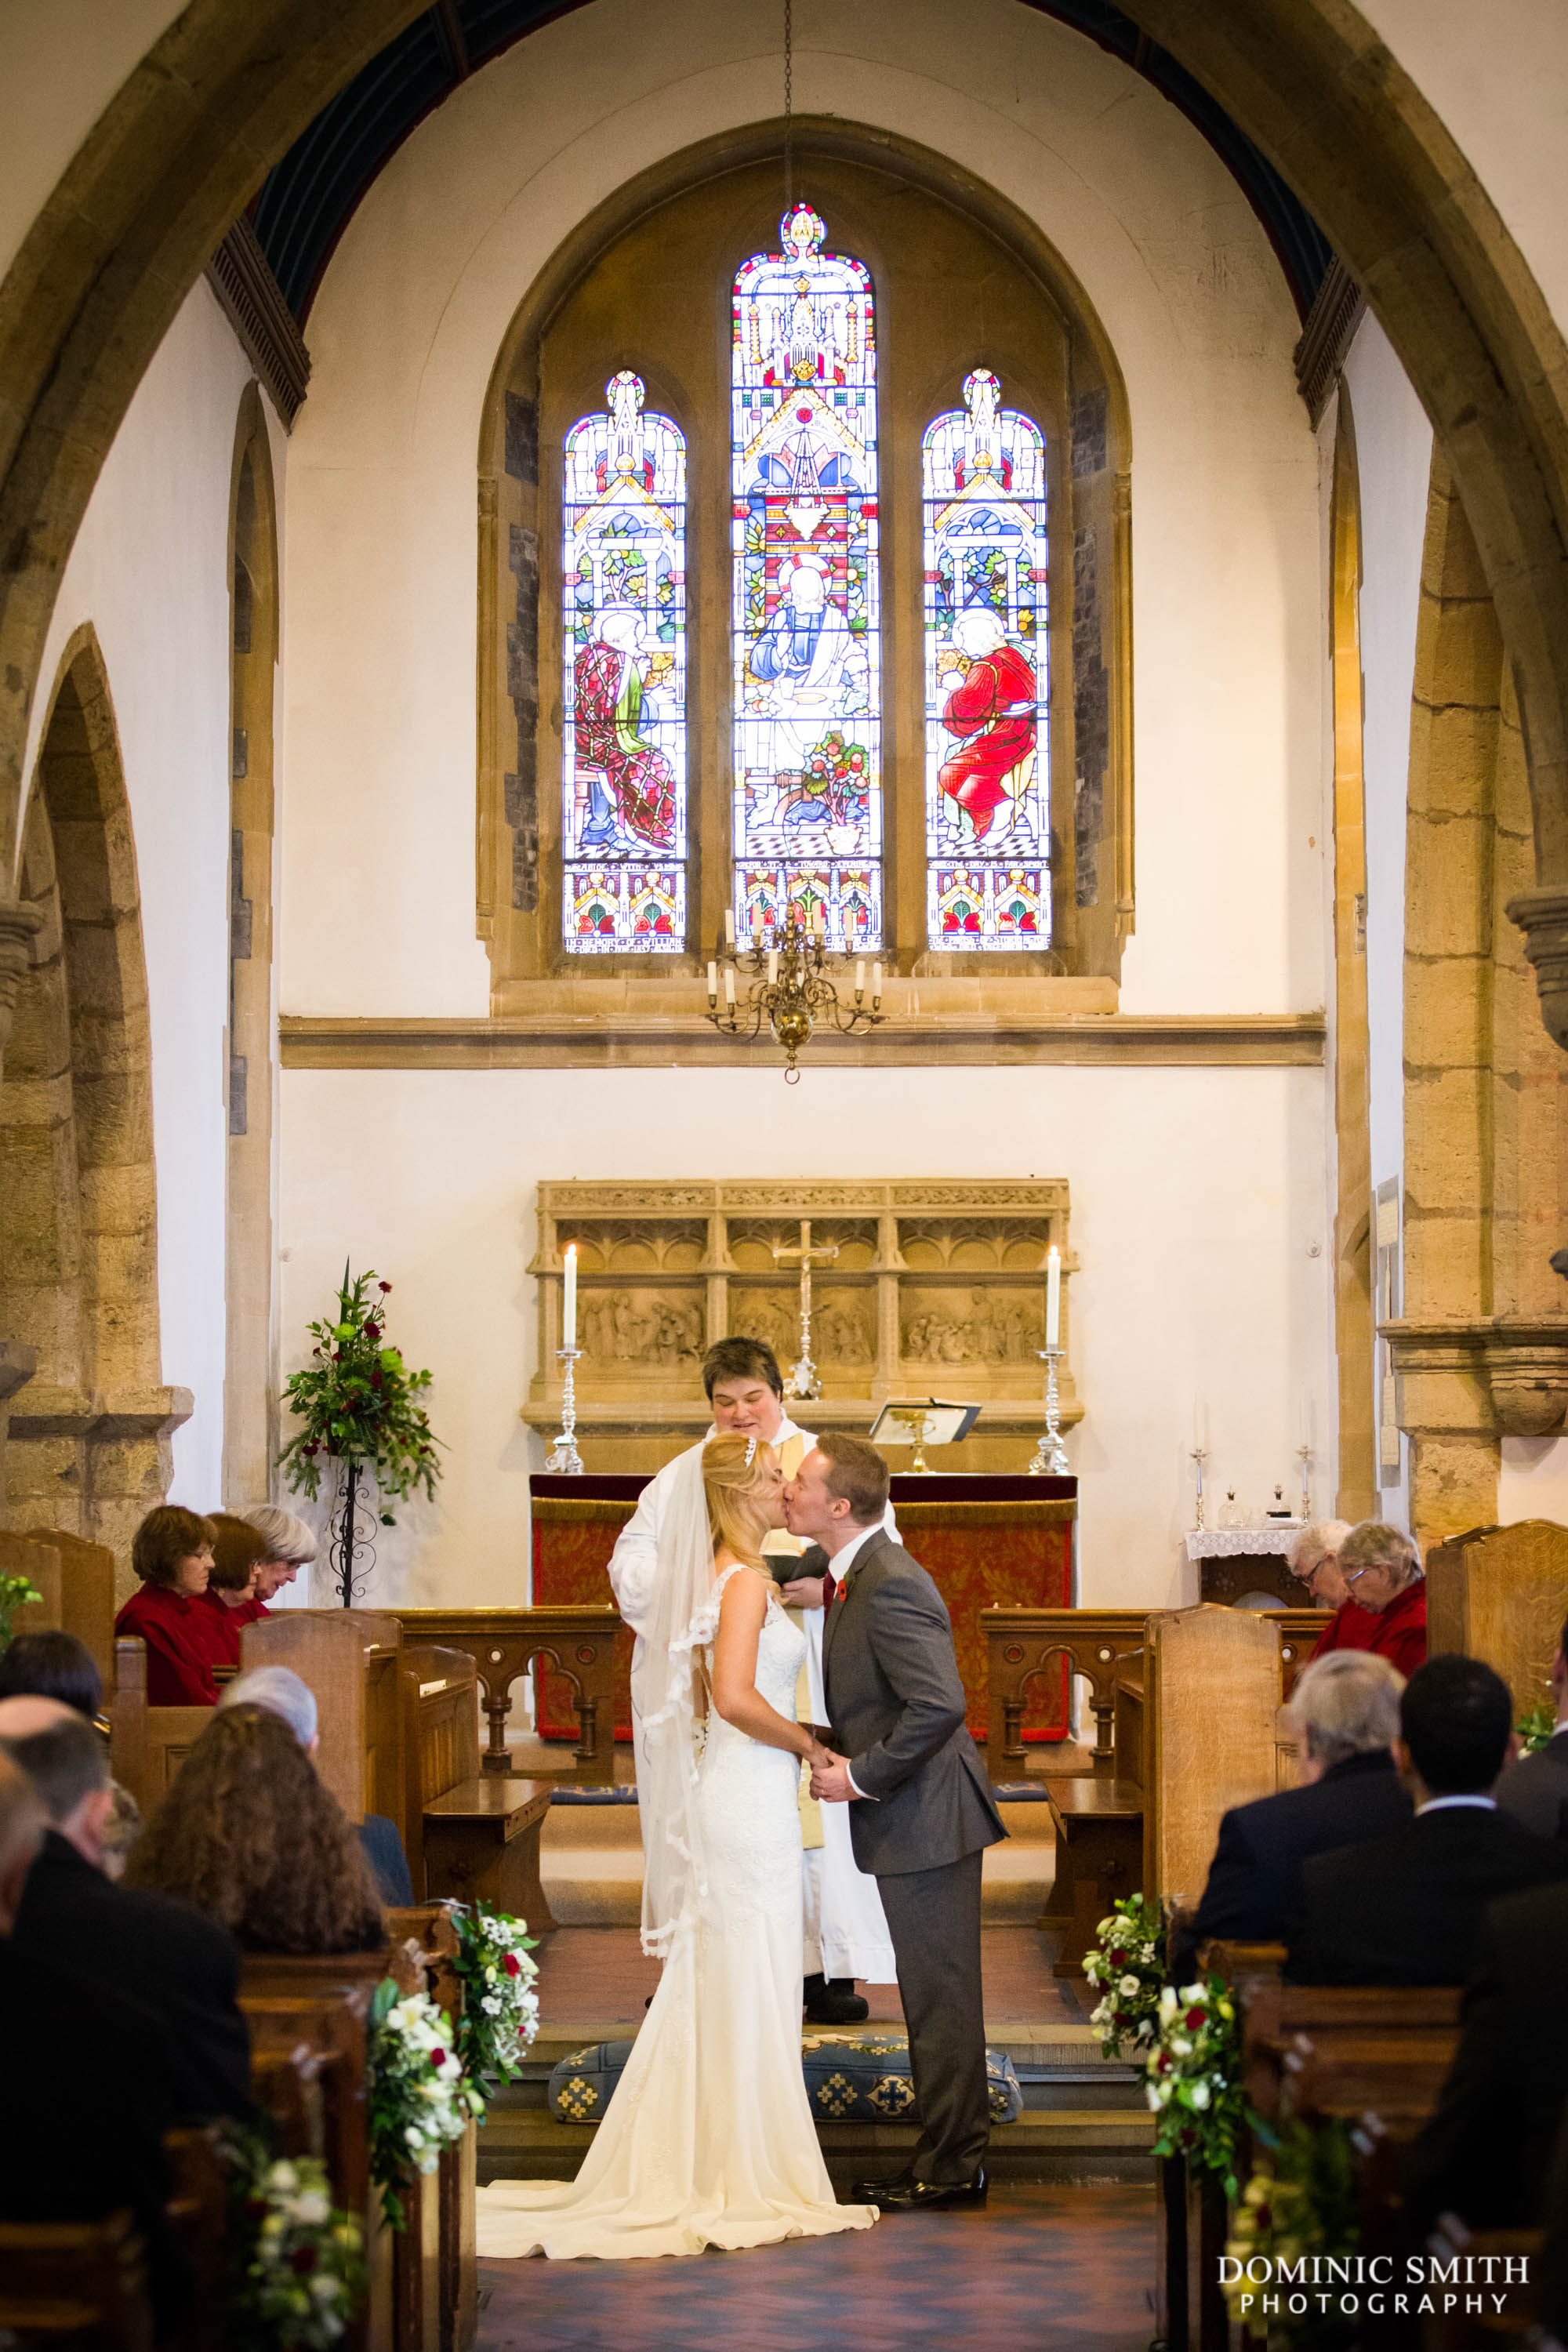 Sussex Wedding Photographer - Dominic Smith Photography